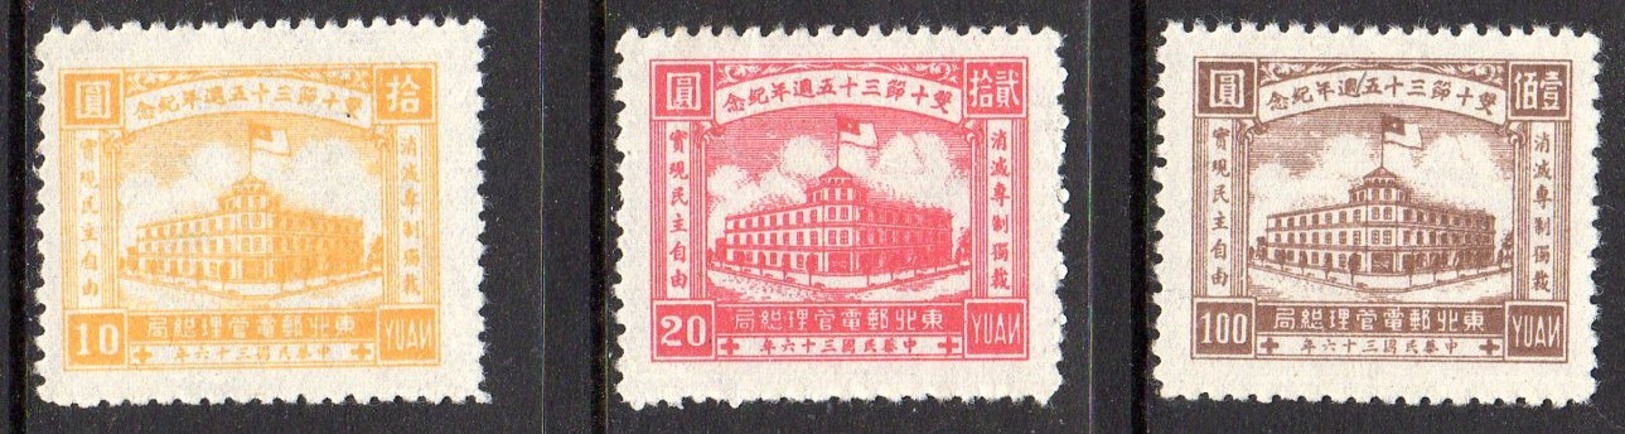 1947 Double Ten’ MNH Set Very Fine Yang NE93-5 Privately Barely Offered Anymore &  CERTIFICATE (NE-29) - China Del Nordeste 1946-48